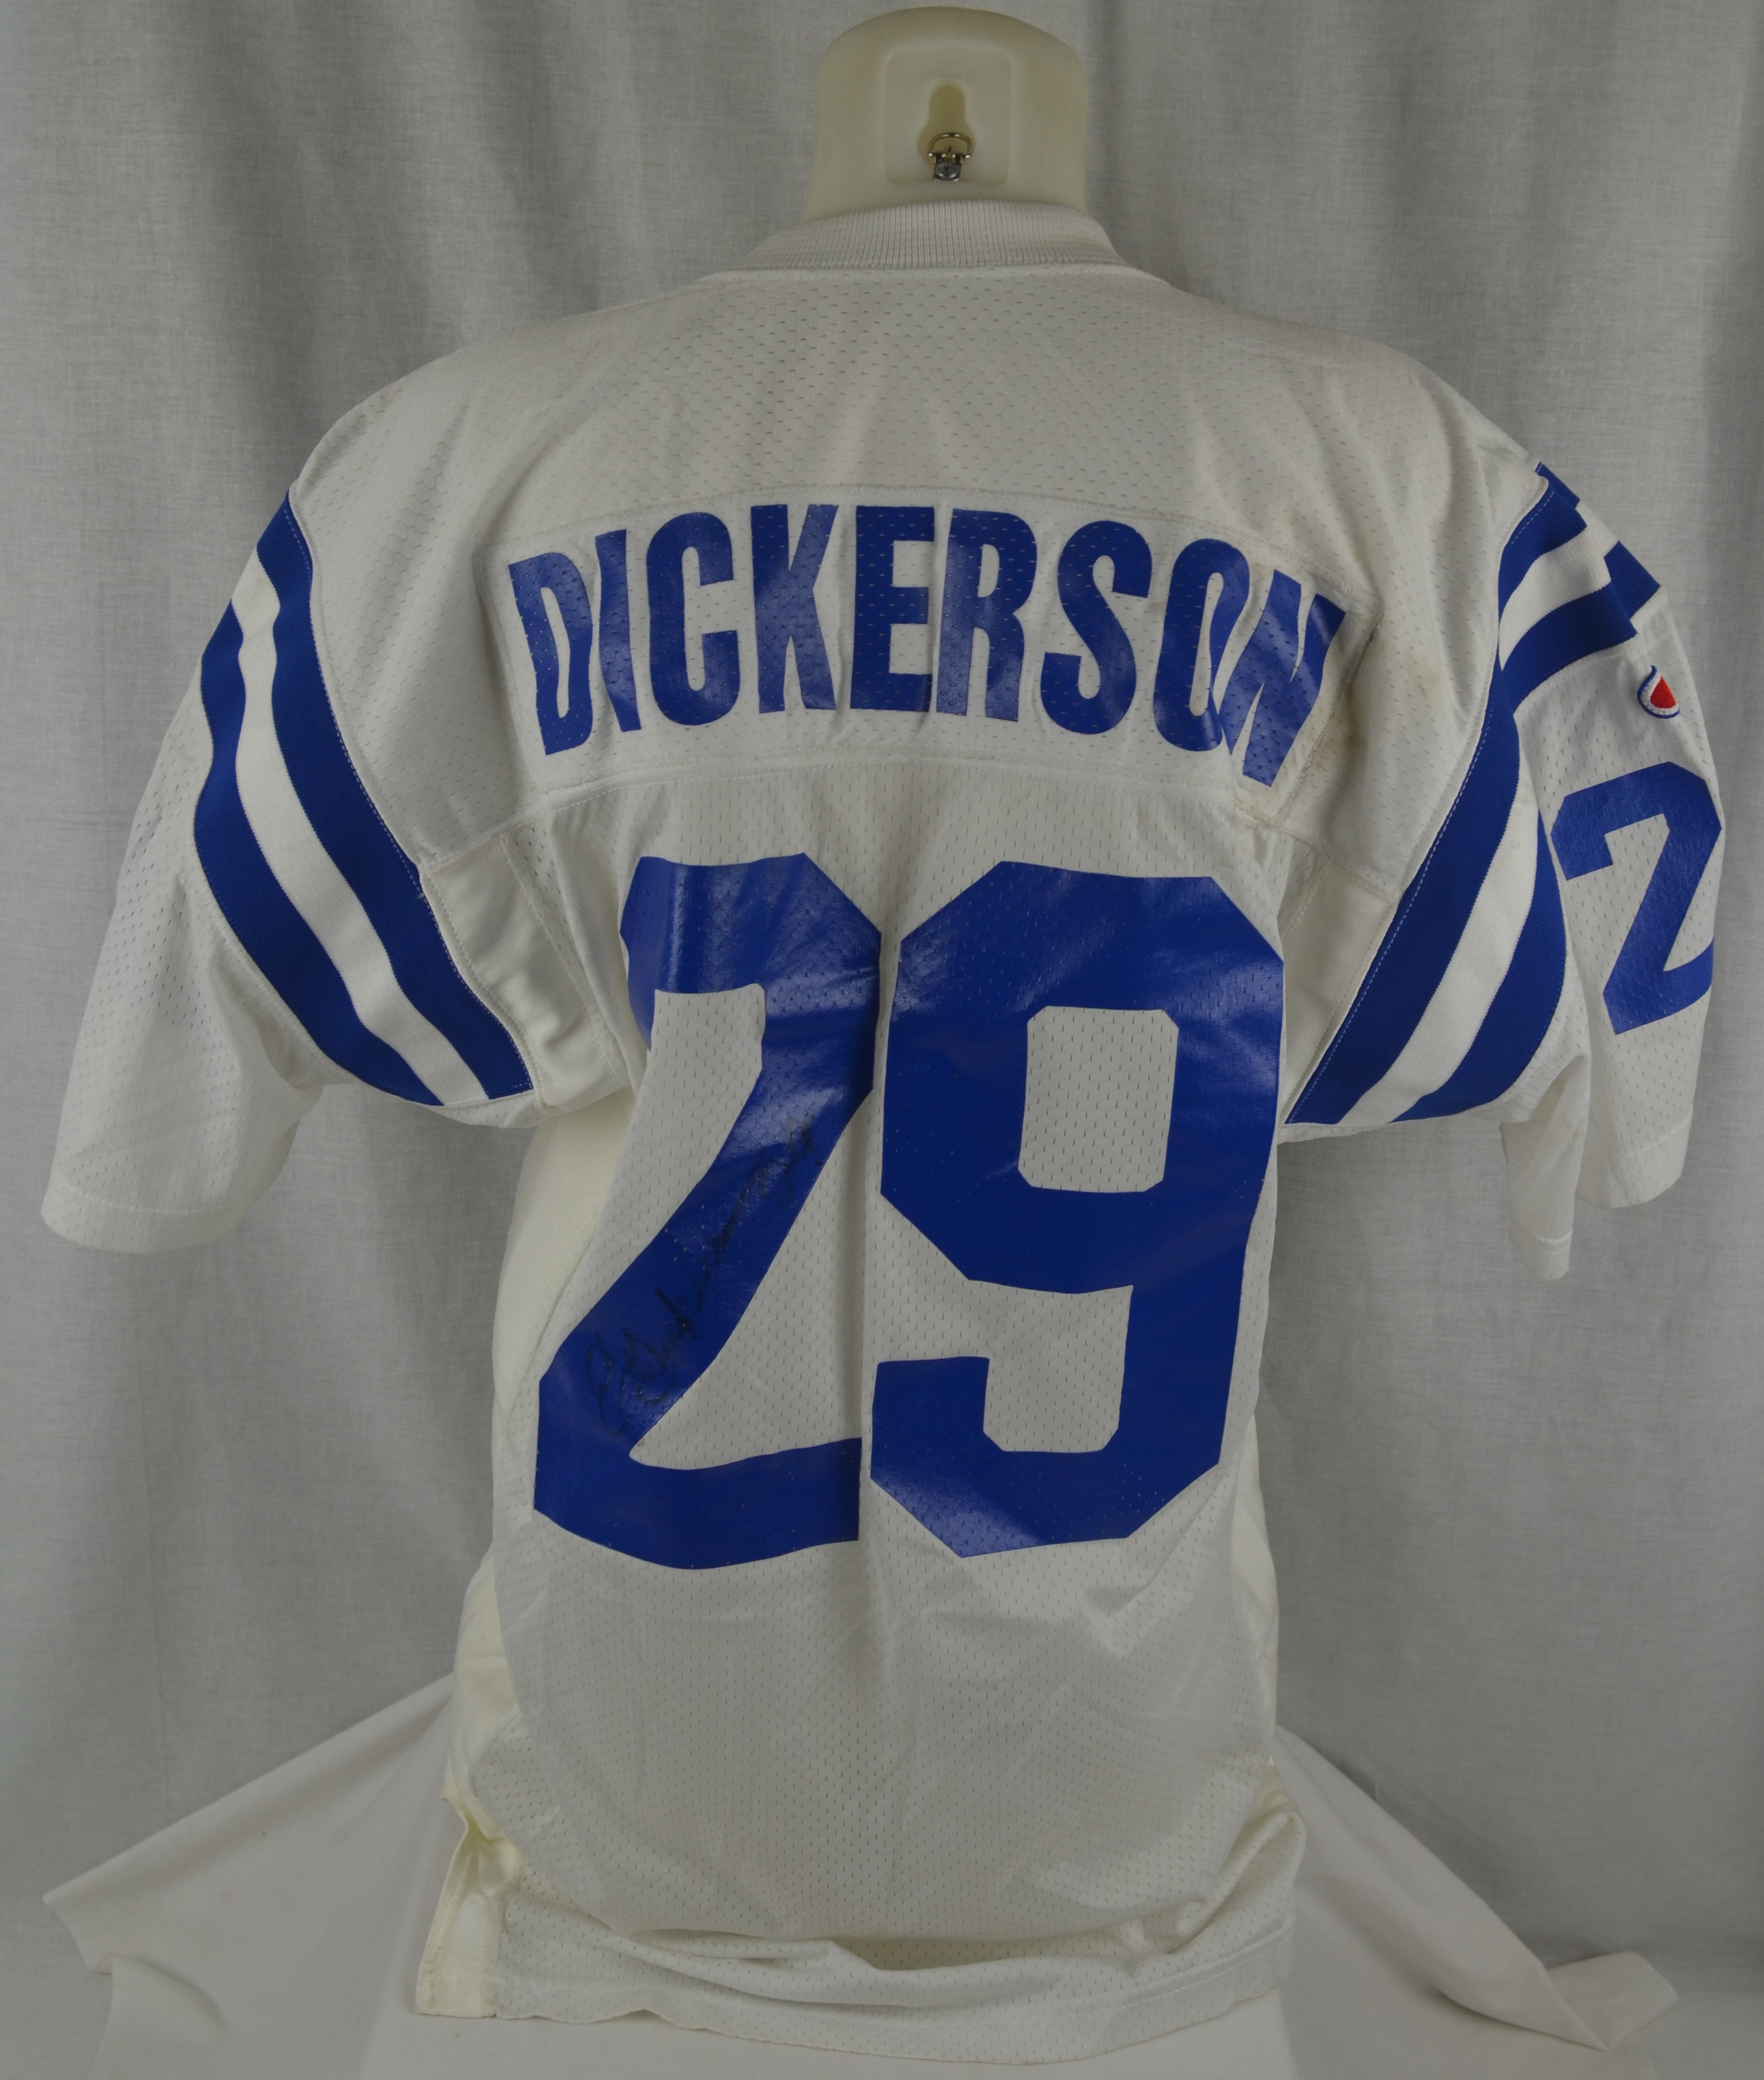 Eric Dickerson Indianapolis Colts 